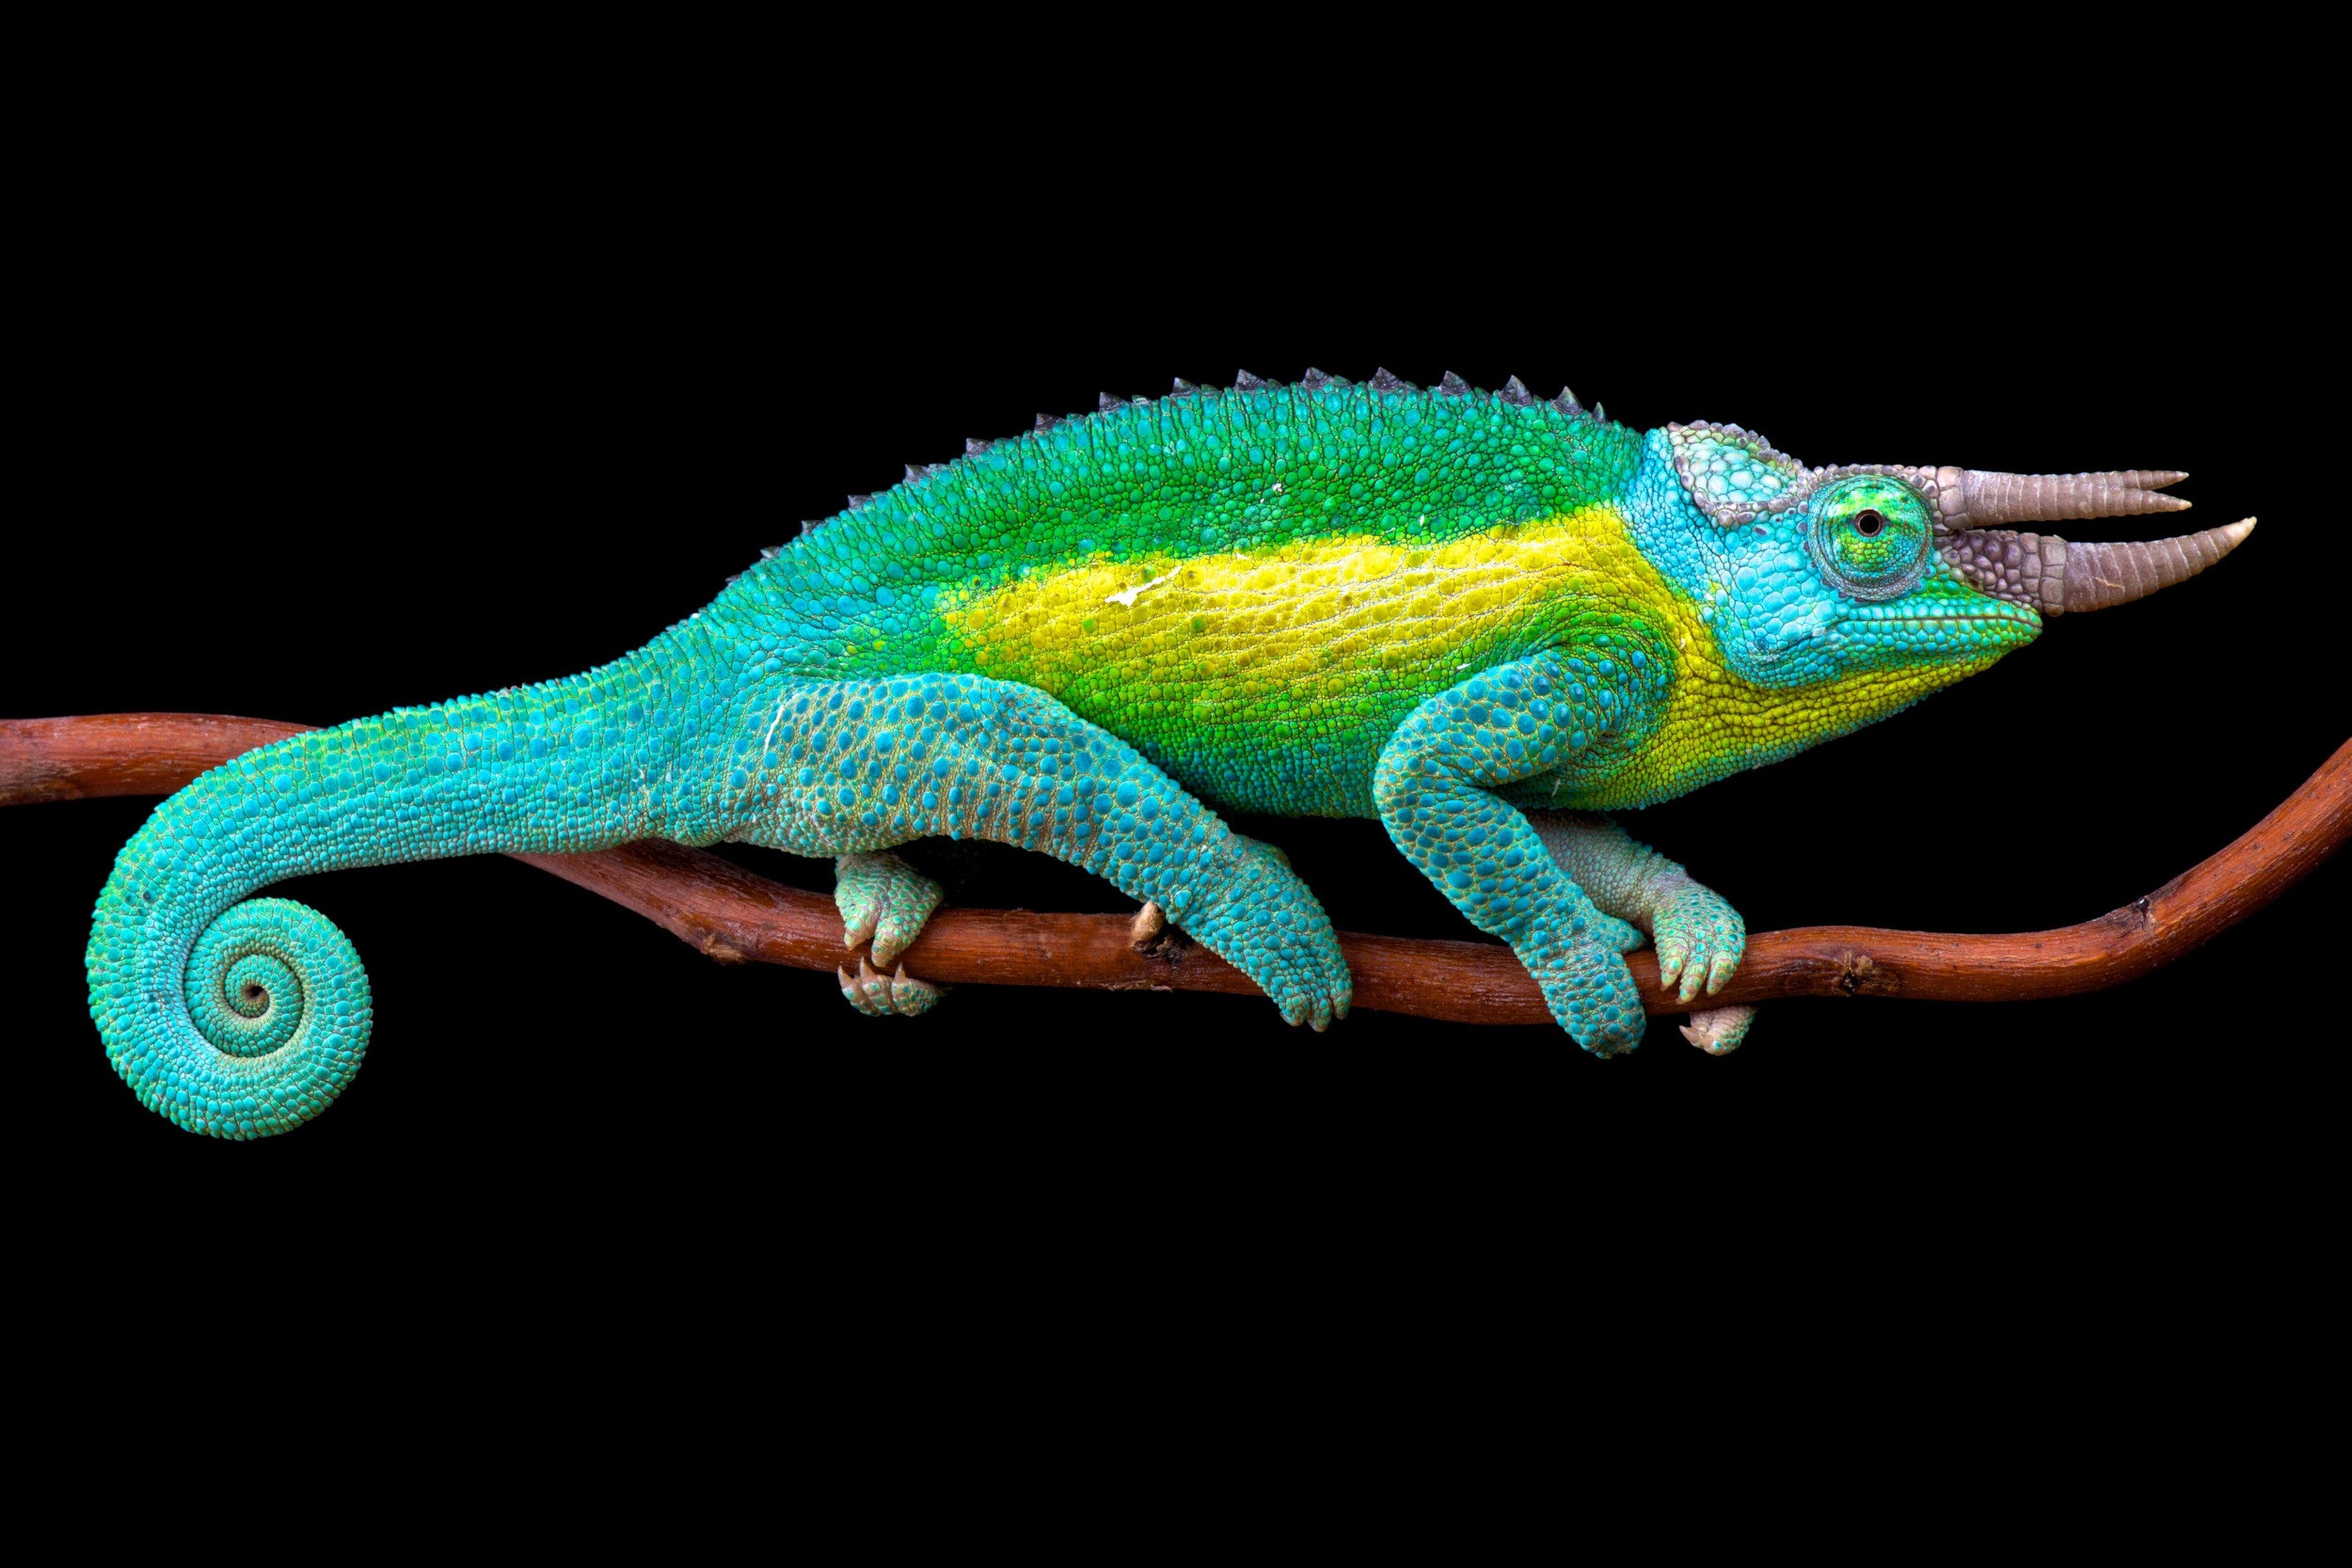 A Jackson's Chameleon: the horns are used to duell against rival chameleons.